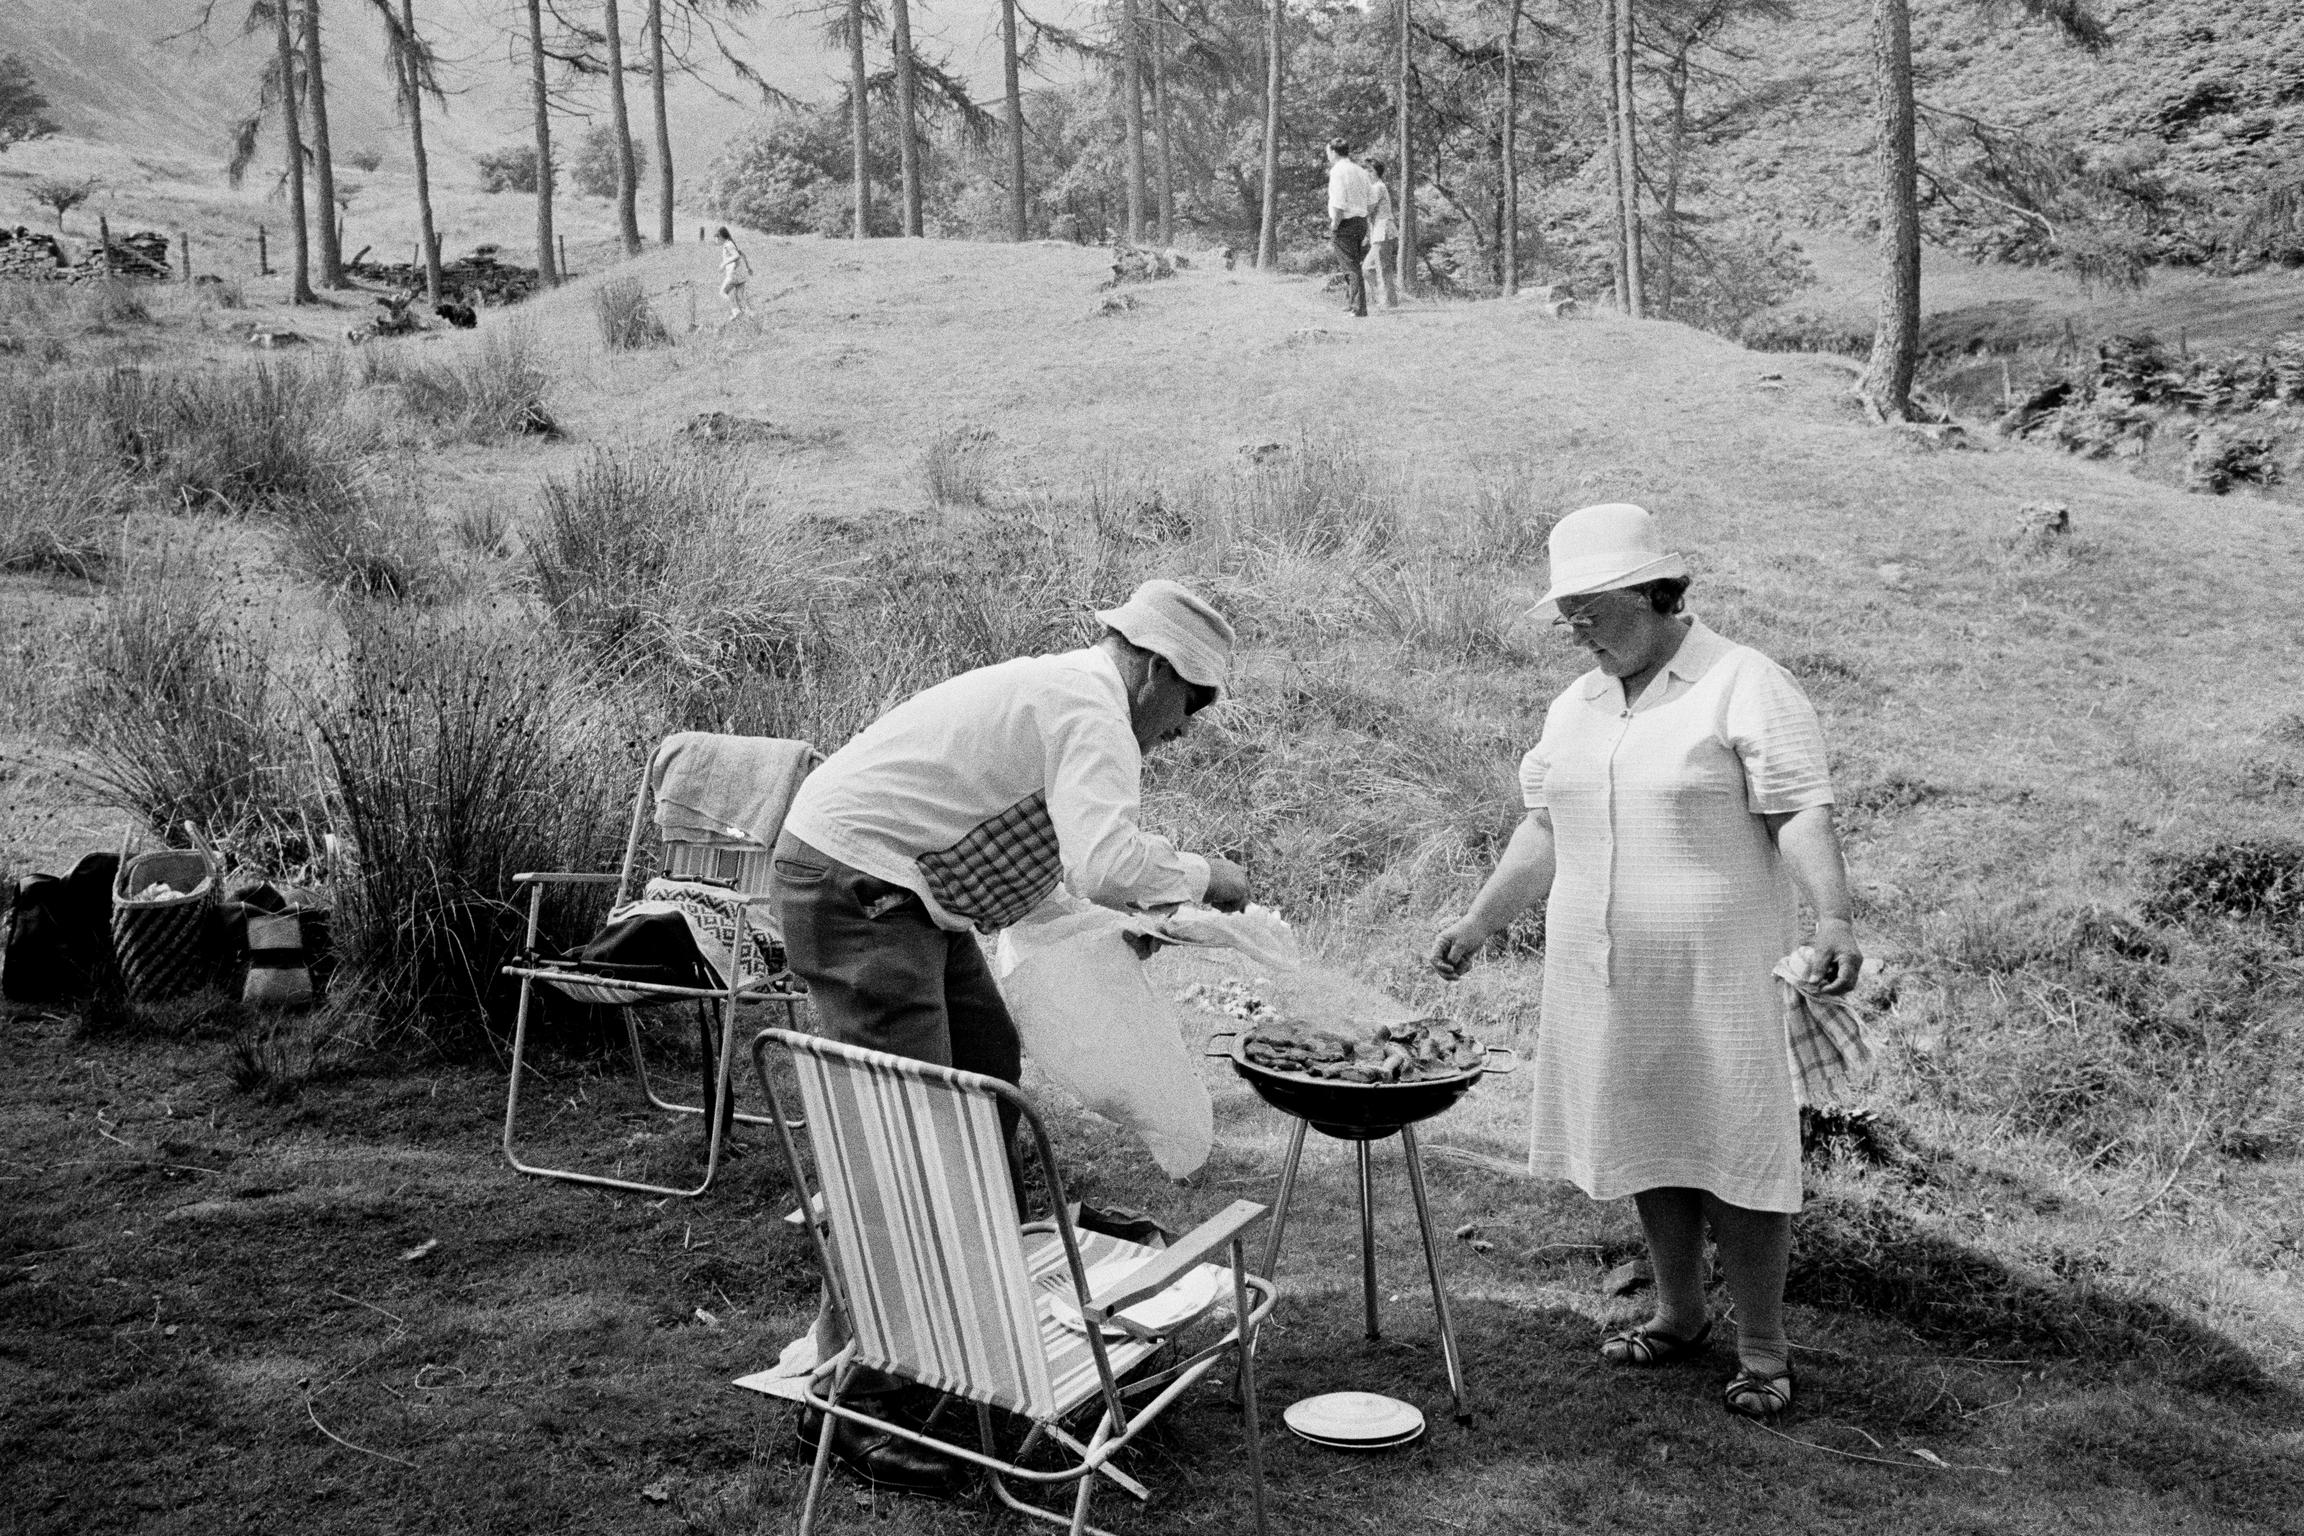 Open air barbecue in the Brecon Beacons, Wales